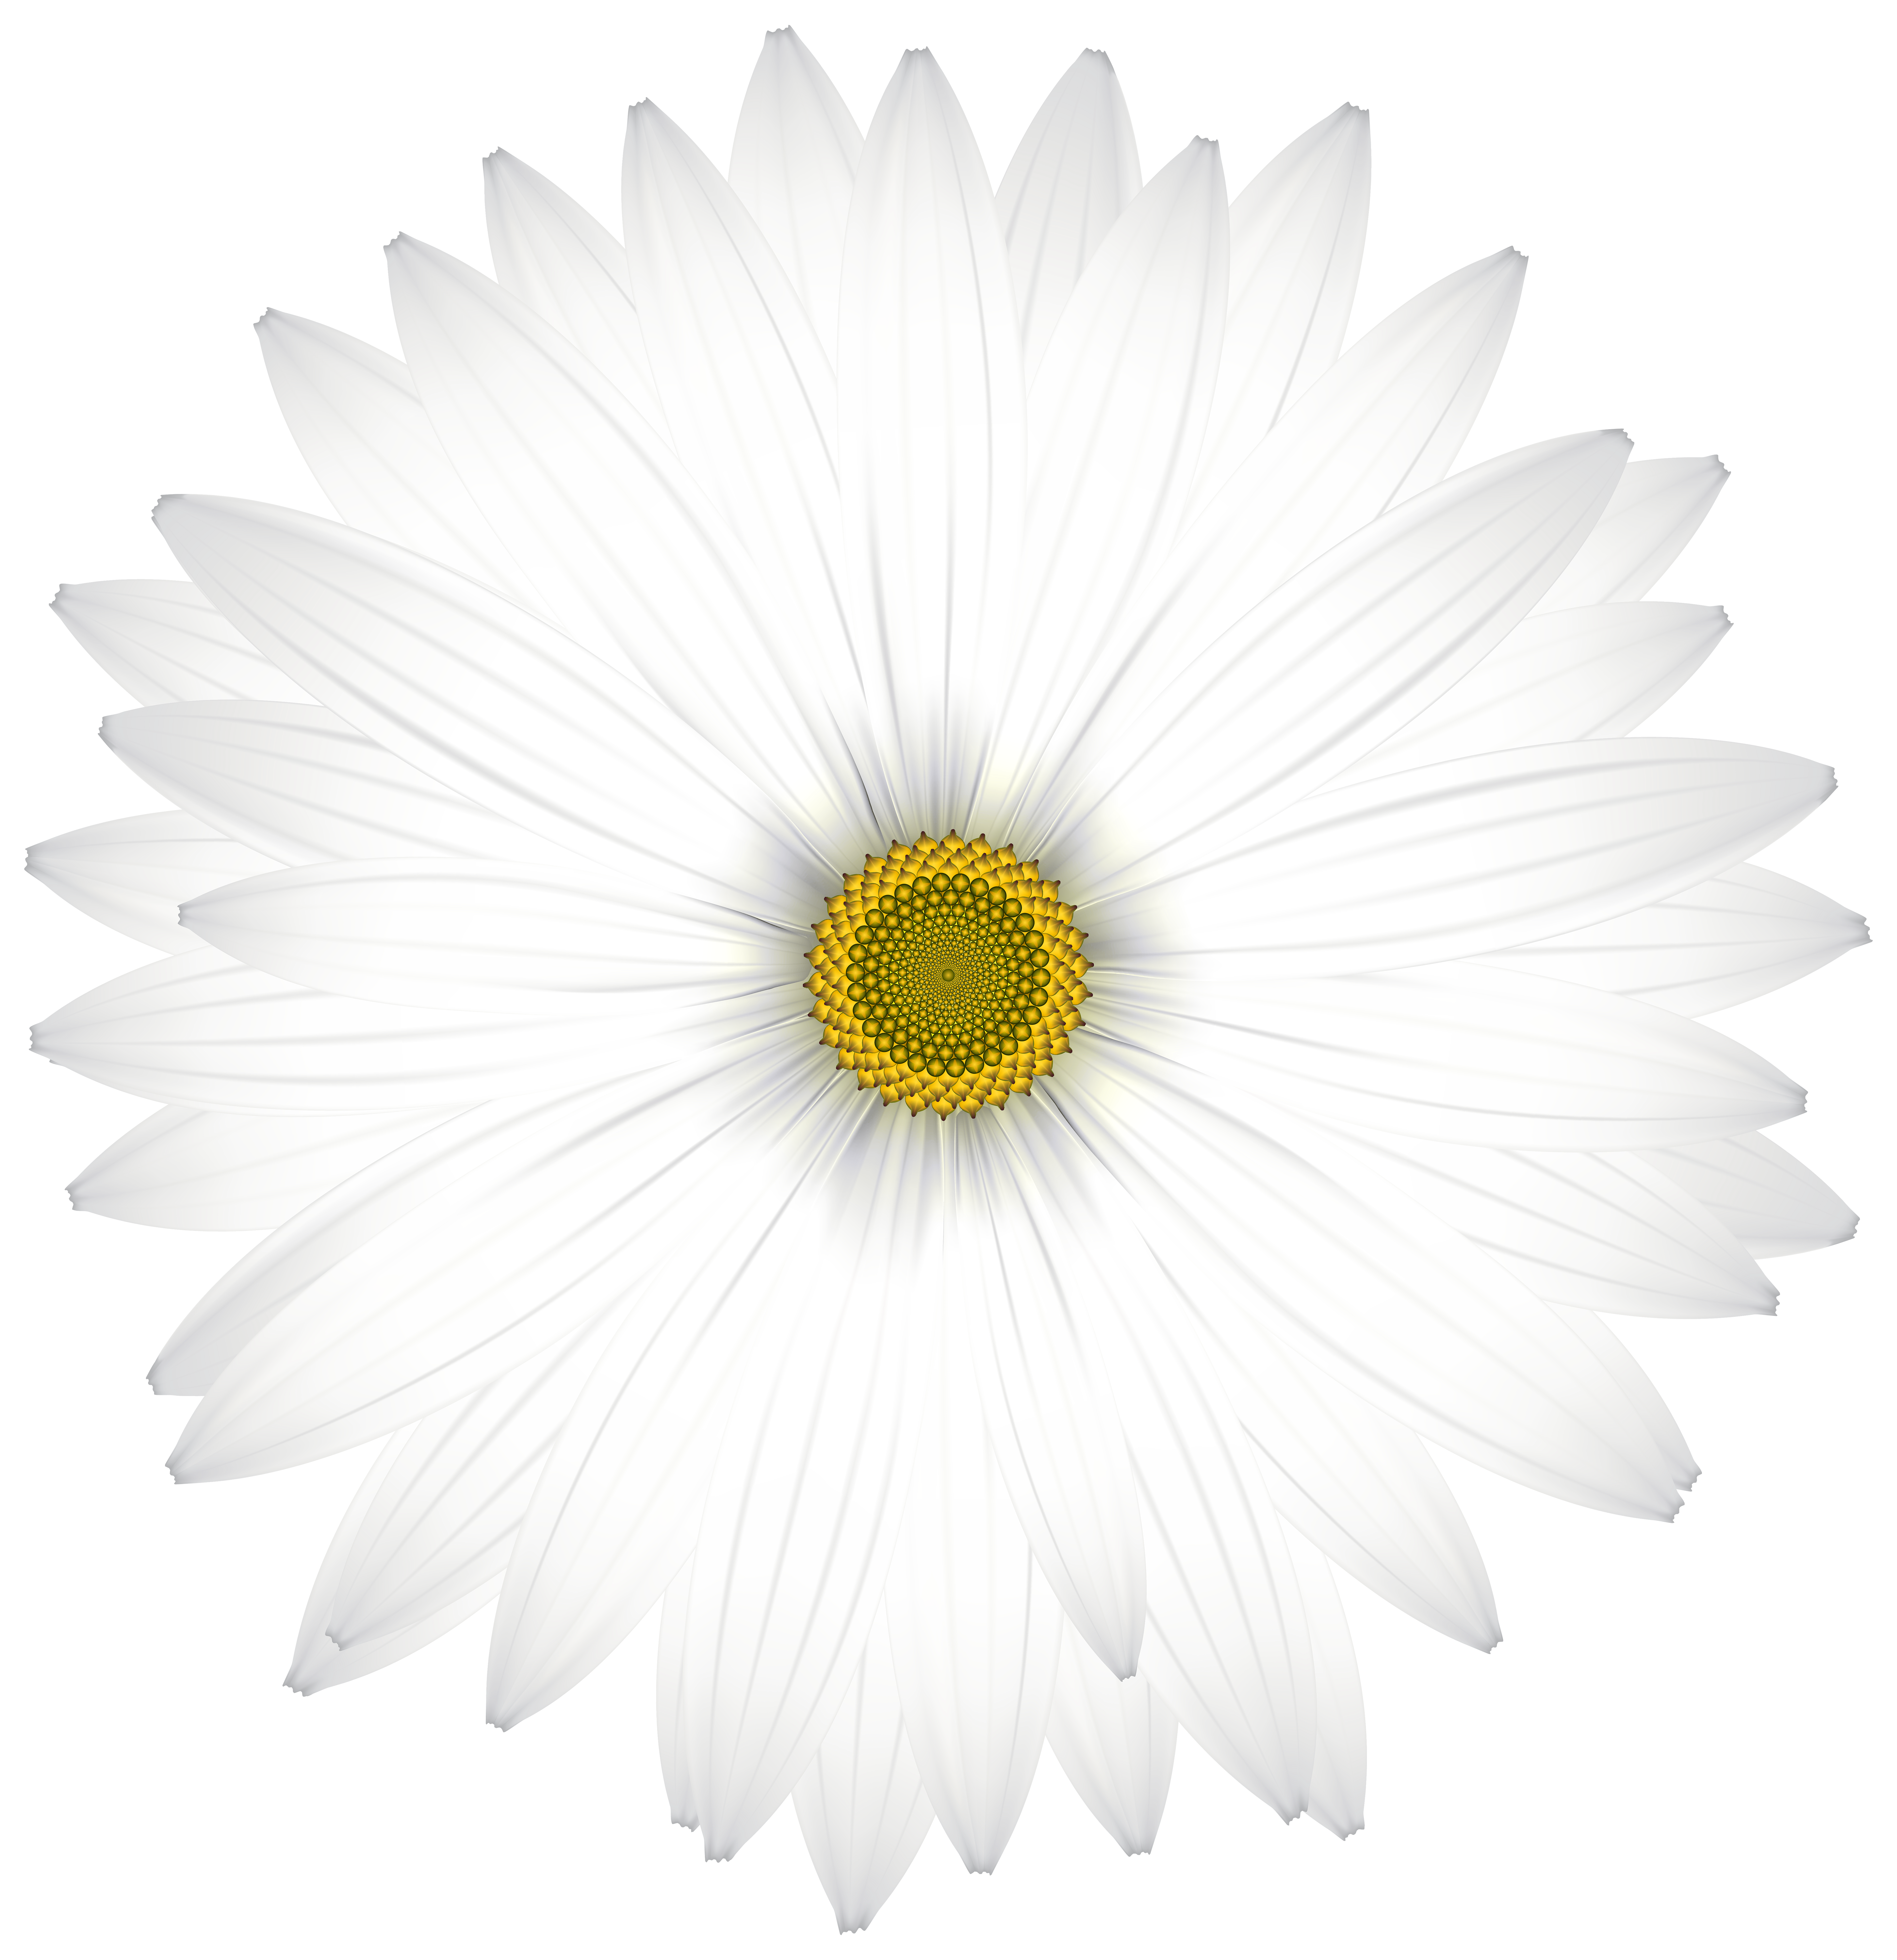 Daisy Flower Vector Transparent Png Amp Svg Vector File - Bank2home.com